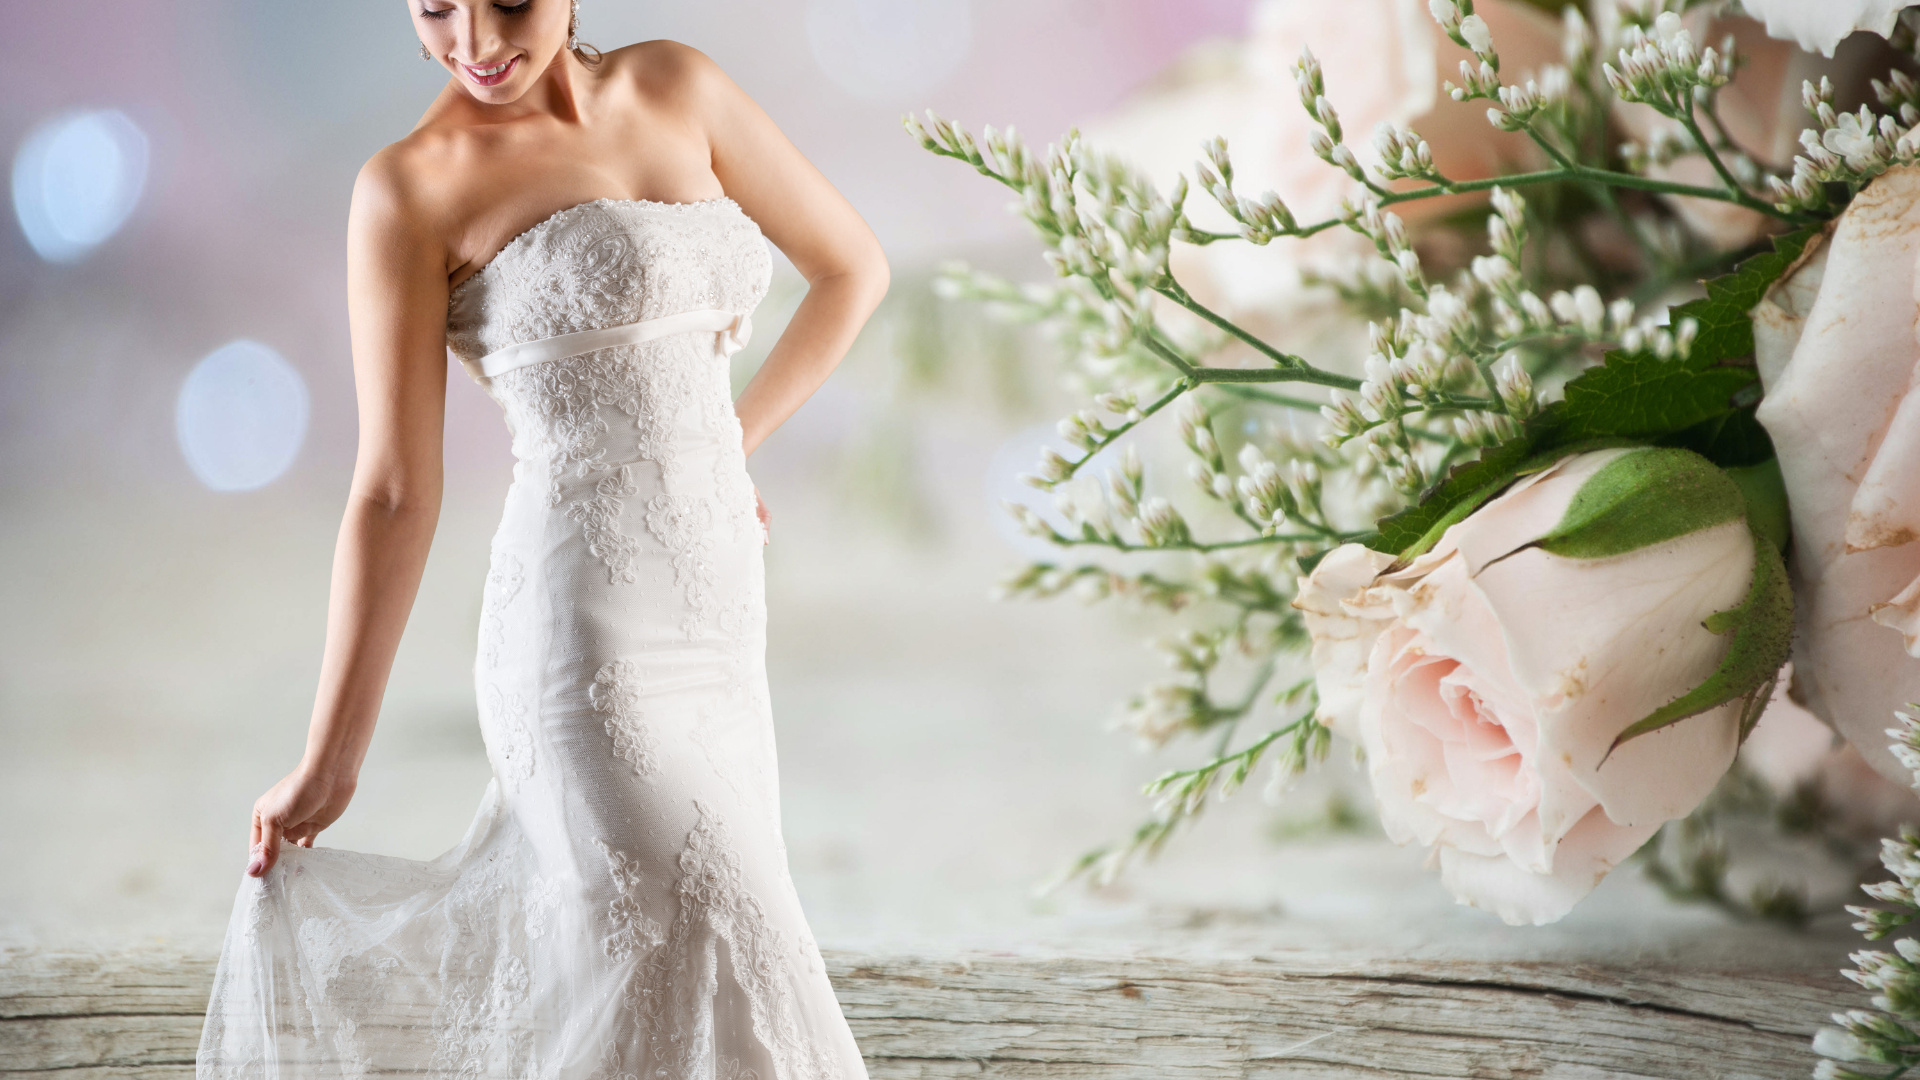 Bridal Boutique Wedding Gowns and Accessories East Tennessee